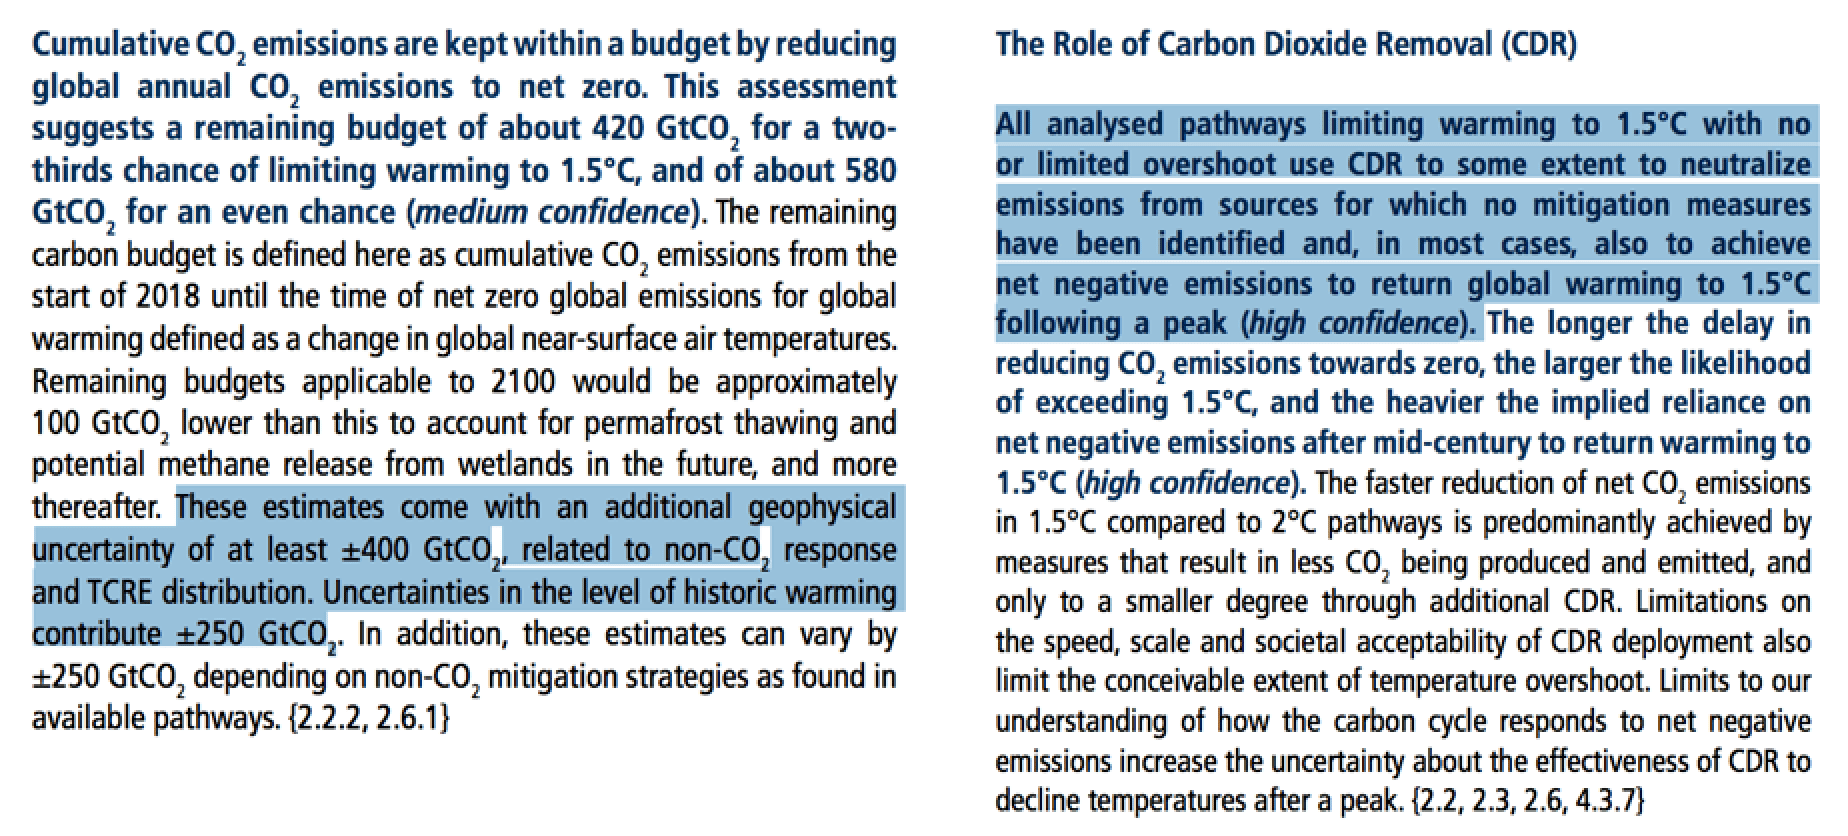 ipcc snippits on role of cdr